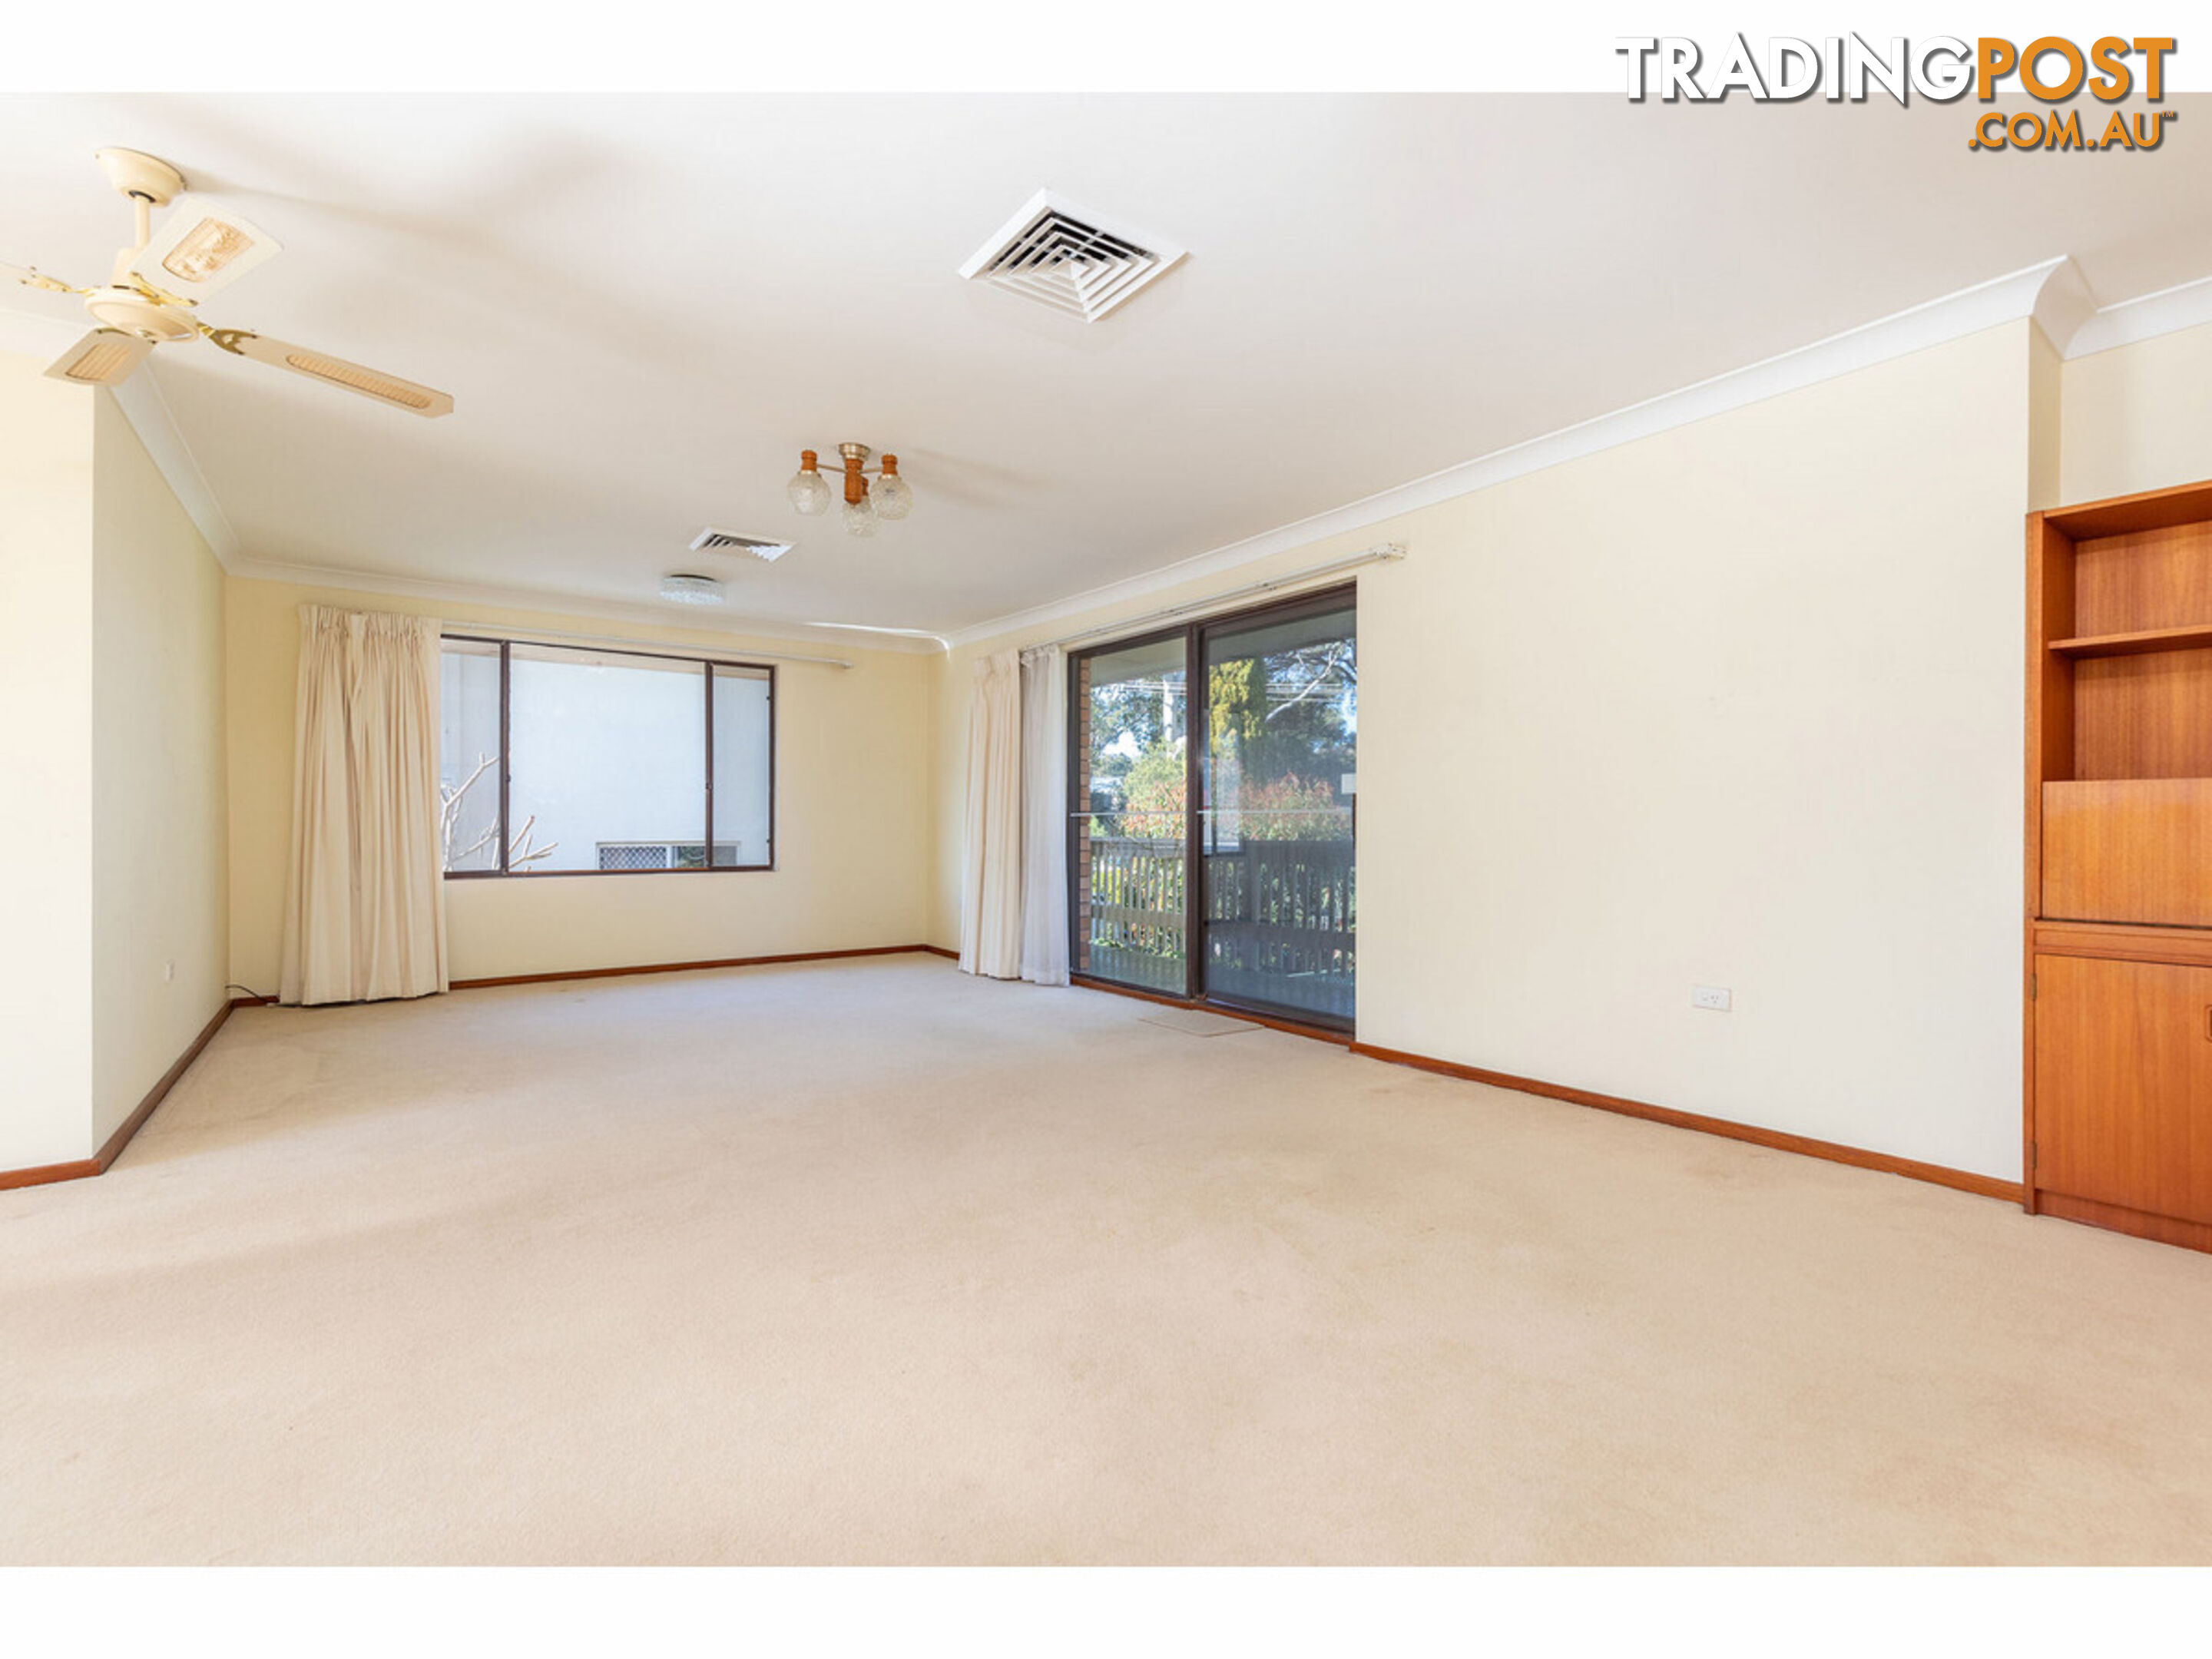 21 Well Street FORSTER NSW 2428